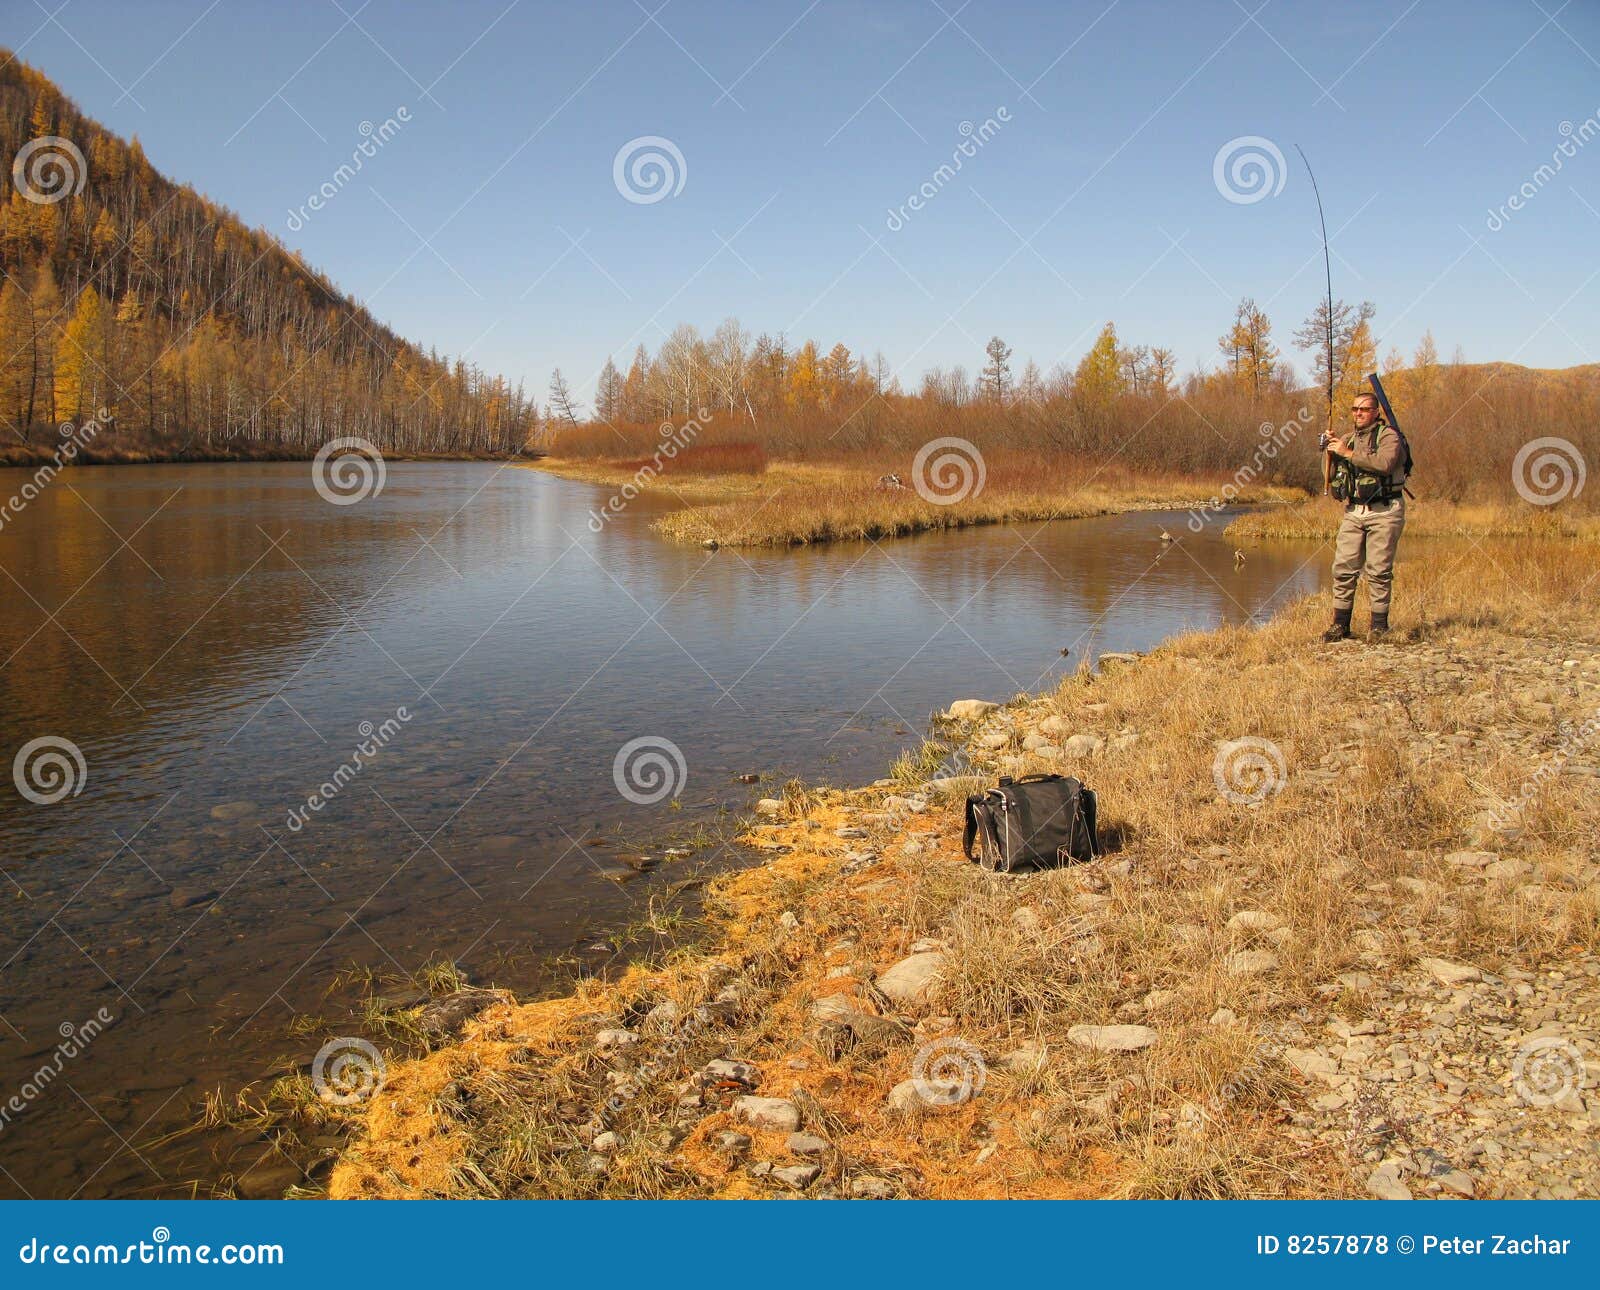 fishing in wildness (happy free time)